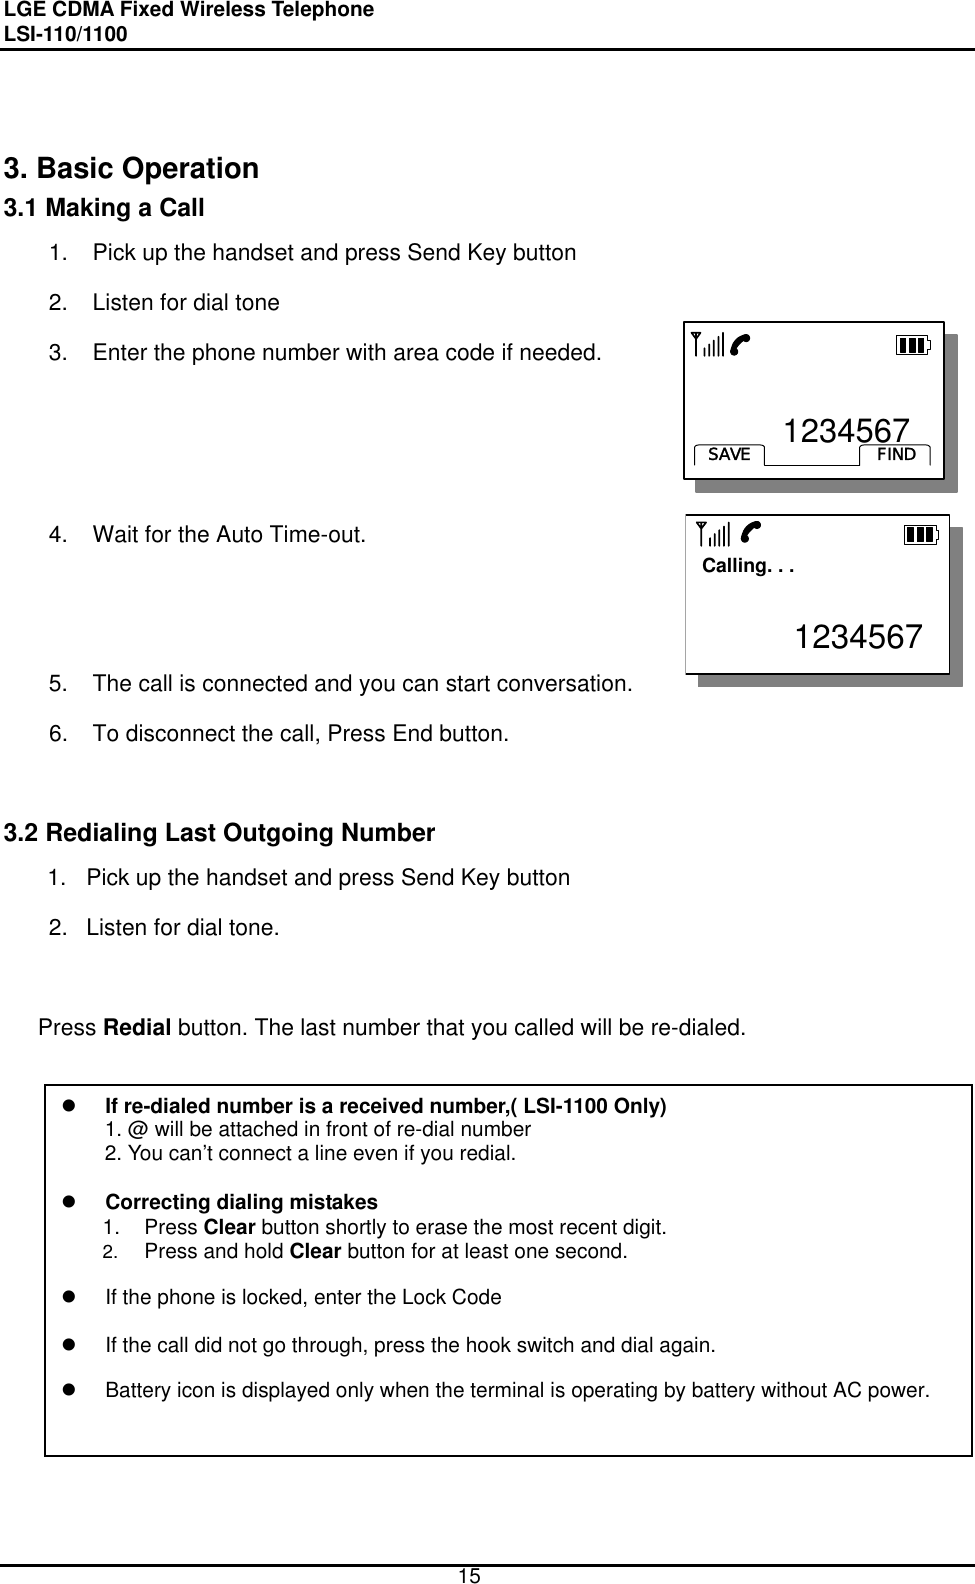 LGE CDMA Fixed Wireless Telephone                                       LSI-110/1100     15    3. Basic Operation 3.1 Making a Call 1.  Pick up the handset and press Send Key button   2.  Listen for dial tone 3.  Enter the phone number with area code if needed.    4.  Wait for the Auto Time-out.        5.  The call is connected and you can start conversation. 6.  To disconnect the call, Press End button.   3.2 Redialing Last Outgoing Number 1.  Pick up the handset and press Send Key button 2.  Listen for dial tone.  Press Redial button. The last number that you called will be re-dialed.  If re-dialed number is a received number,( LSI-1100 Only) 1. @ will be attached in front of re-dial number 2. You can’t connect a line even if you redial.    Correcting dialing mistakes 1. Press Clear button shortly to erase the most recent digit. 2.  Press and hold Clear button for at least one second.    If the phone is locked, enter the Lock Code      If the call did not go through, press the hook switch and dial again.    Battery icon is displayed only when the terminal is operating by battery without AC power.         1234567FINDSAVE       1234567FINDSAVE  Calling. . .           1234567  Calling. . .           1234567